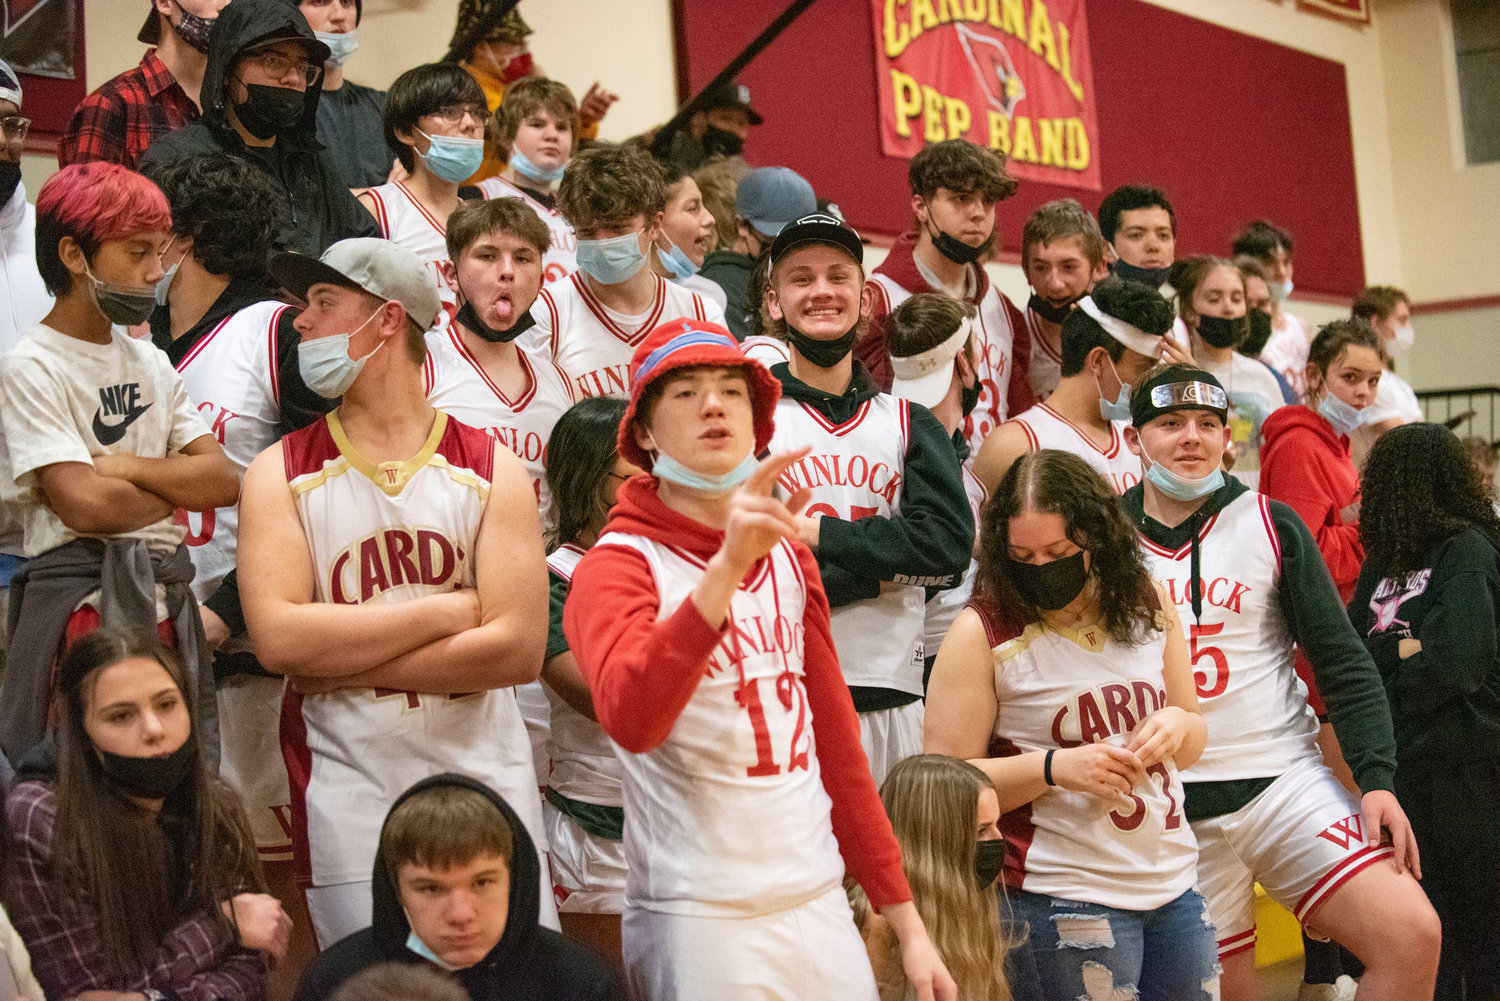 Winlock's student section during a girls basketball game against Onalaska on Dec. 10.